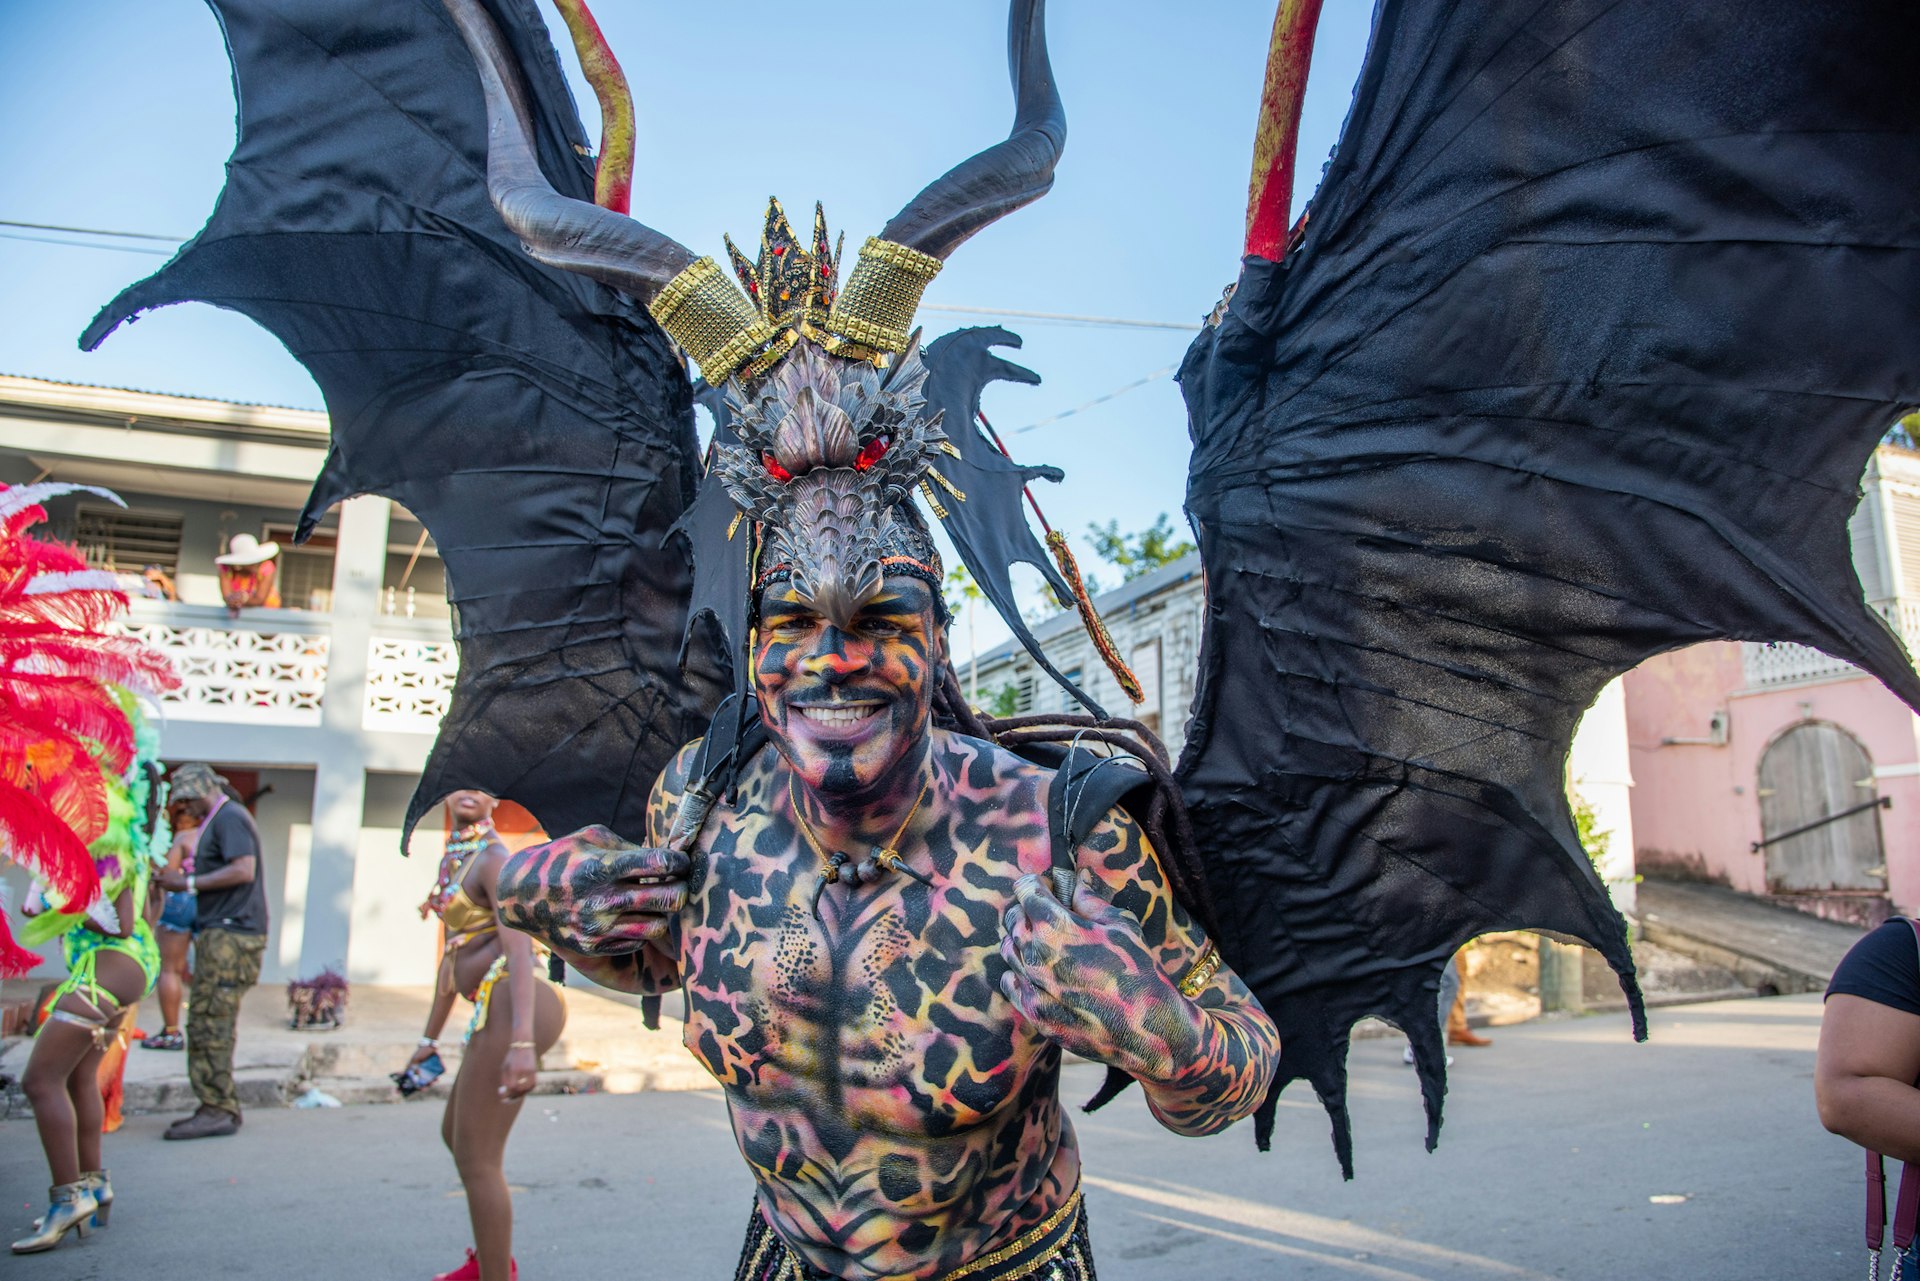 A man in a winged costume and covered in body paint smiles at the camera during Carnival in St Croix